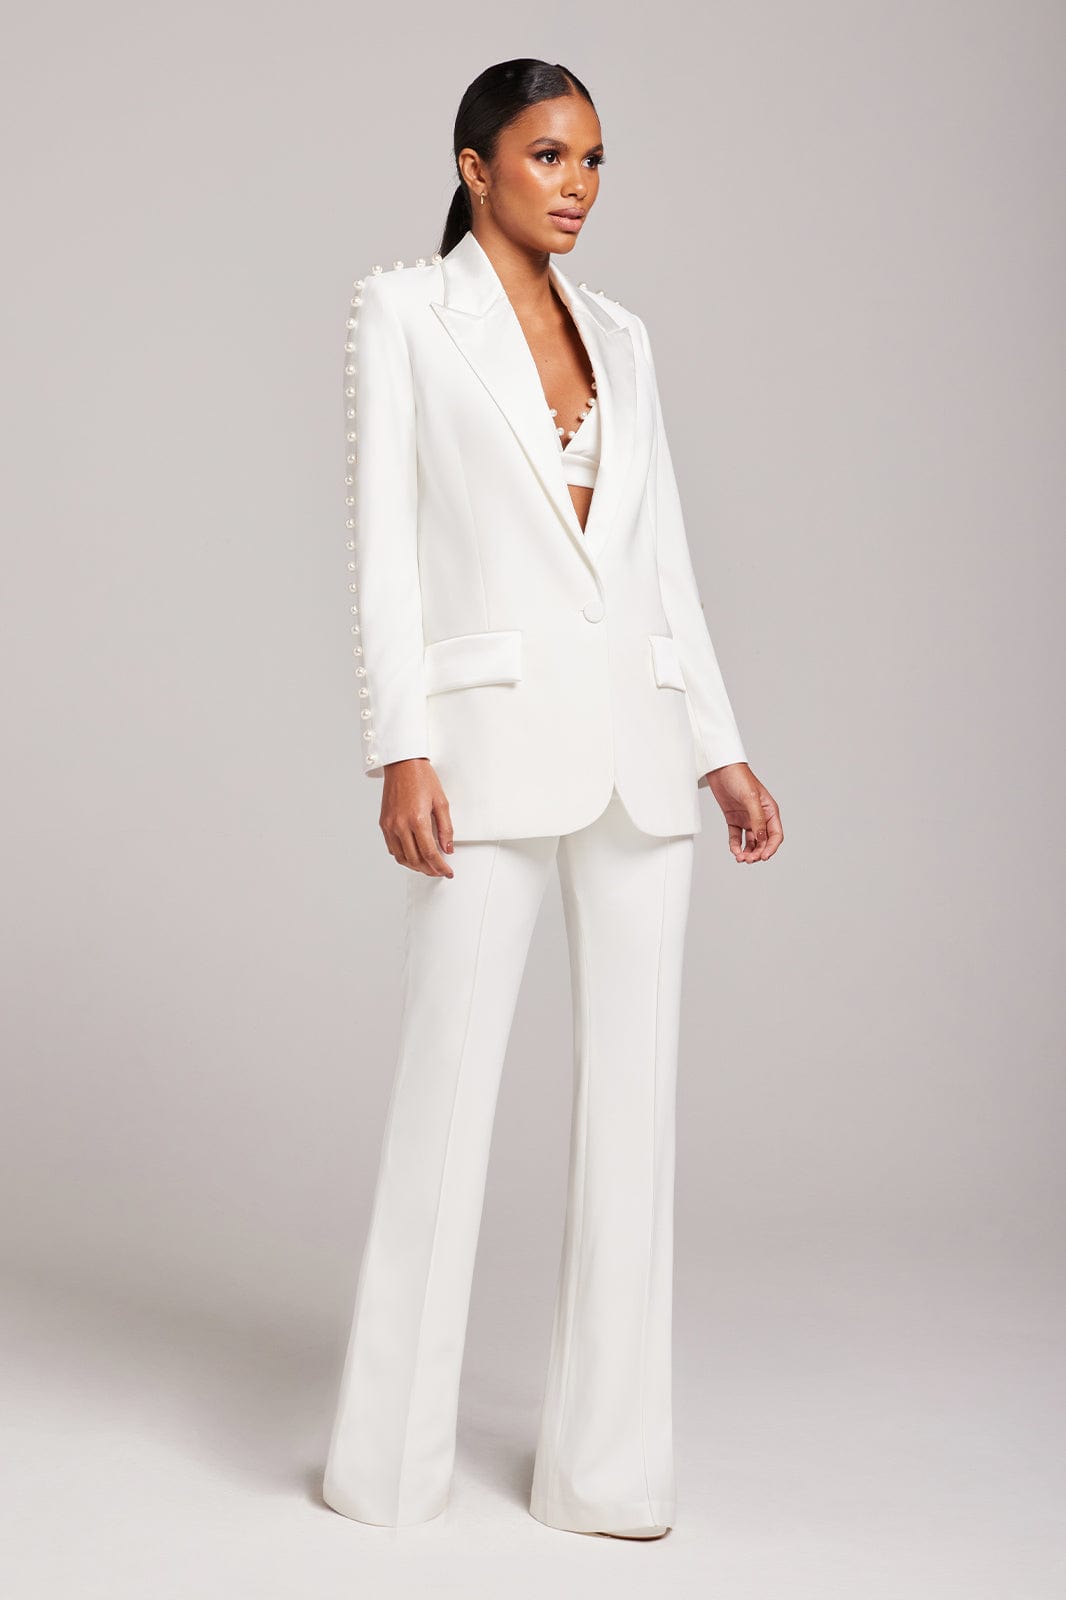 Kate Middleton Alexander McQueen White Suit Trousers